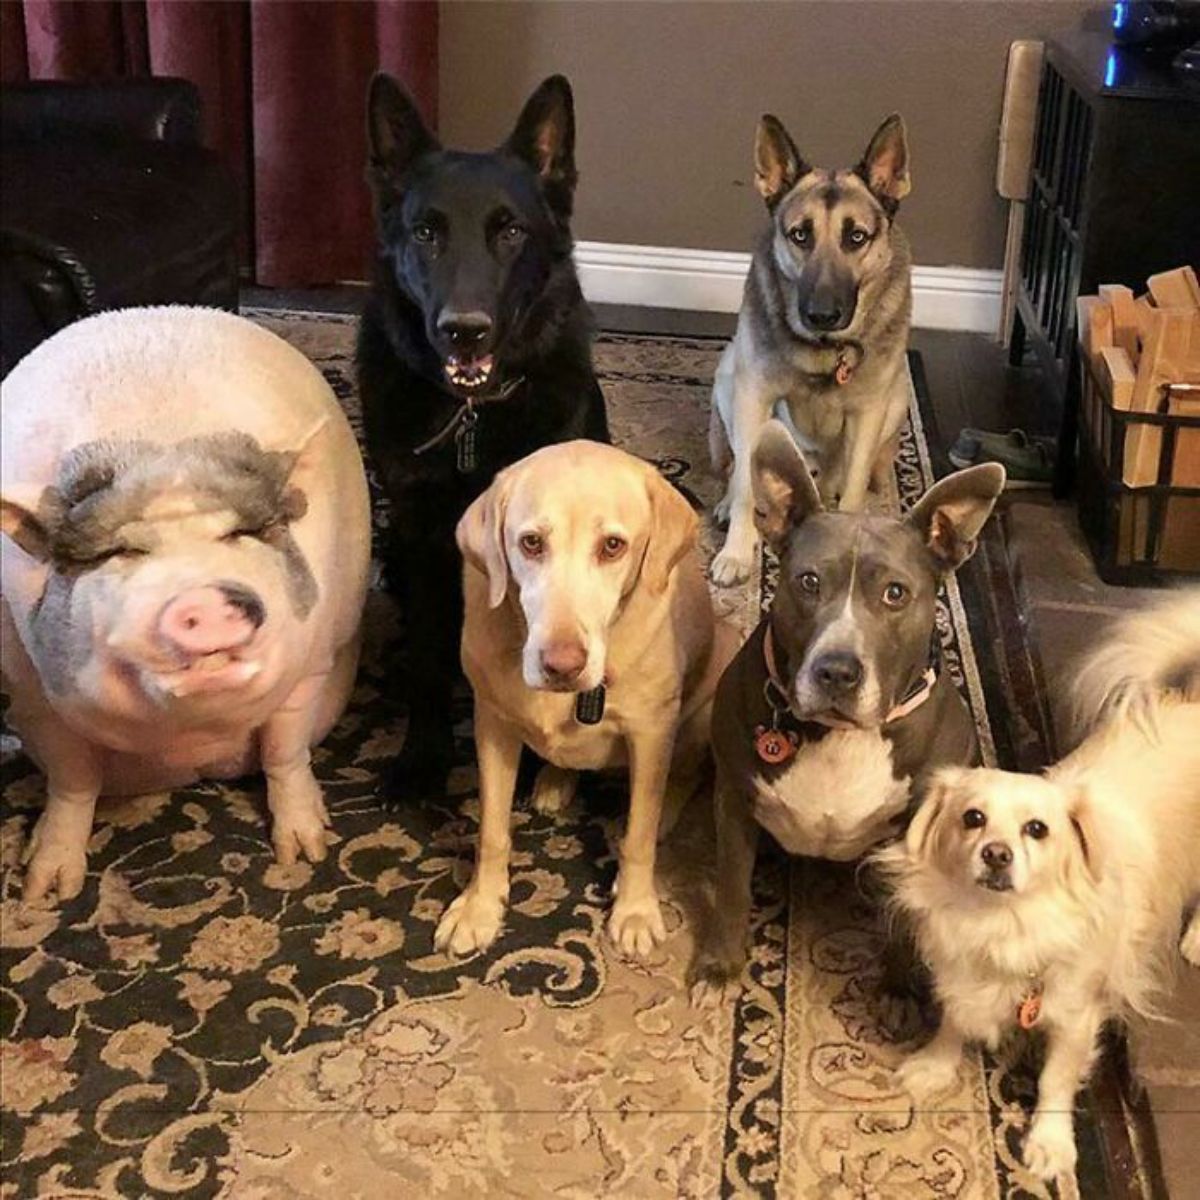 white and black pig standing in a row with a black german shepherd, a yellow labrador, a brown german shepherd, a blue and white pitbull and a small fluffy white dog